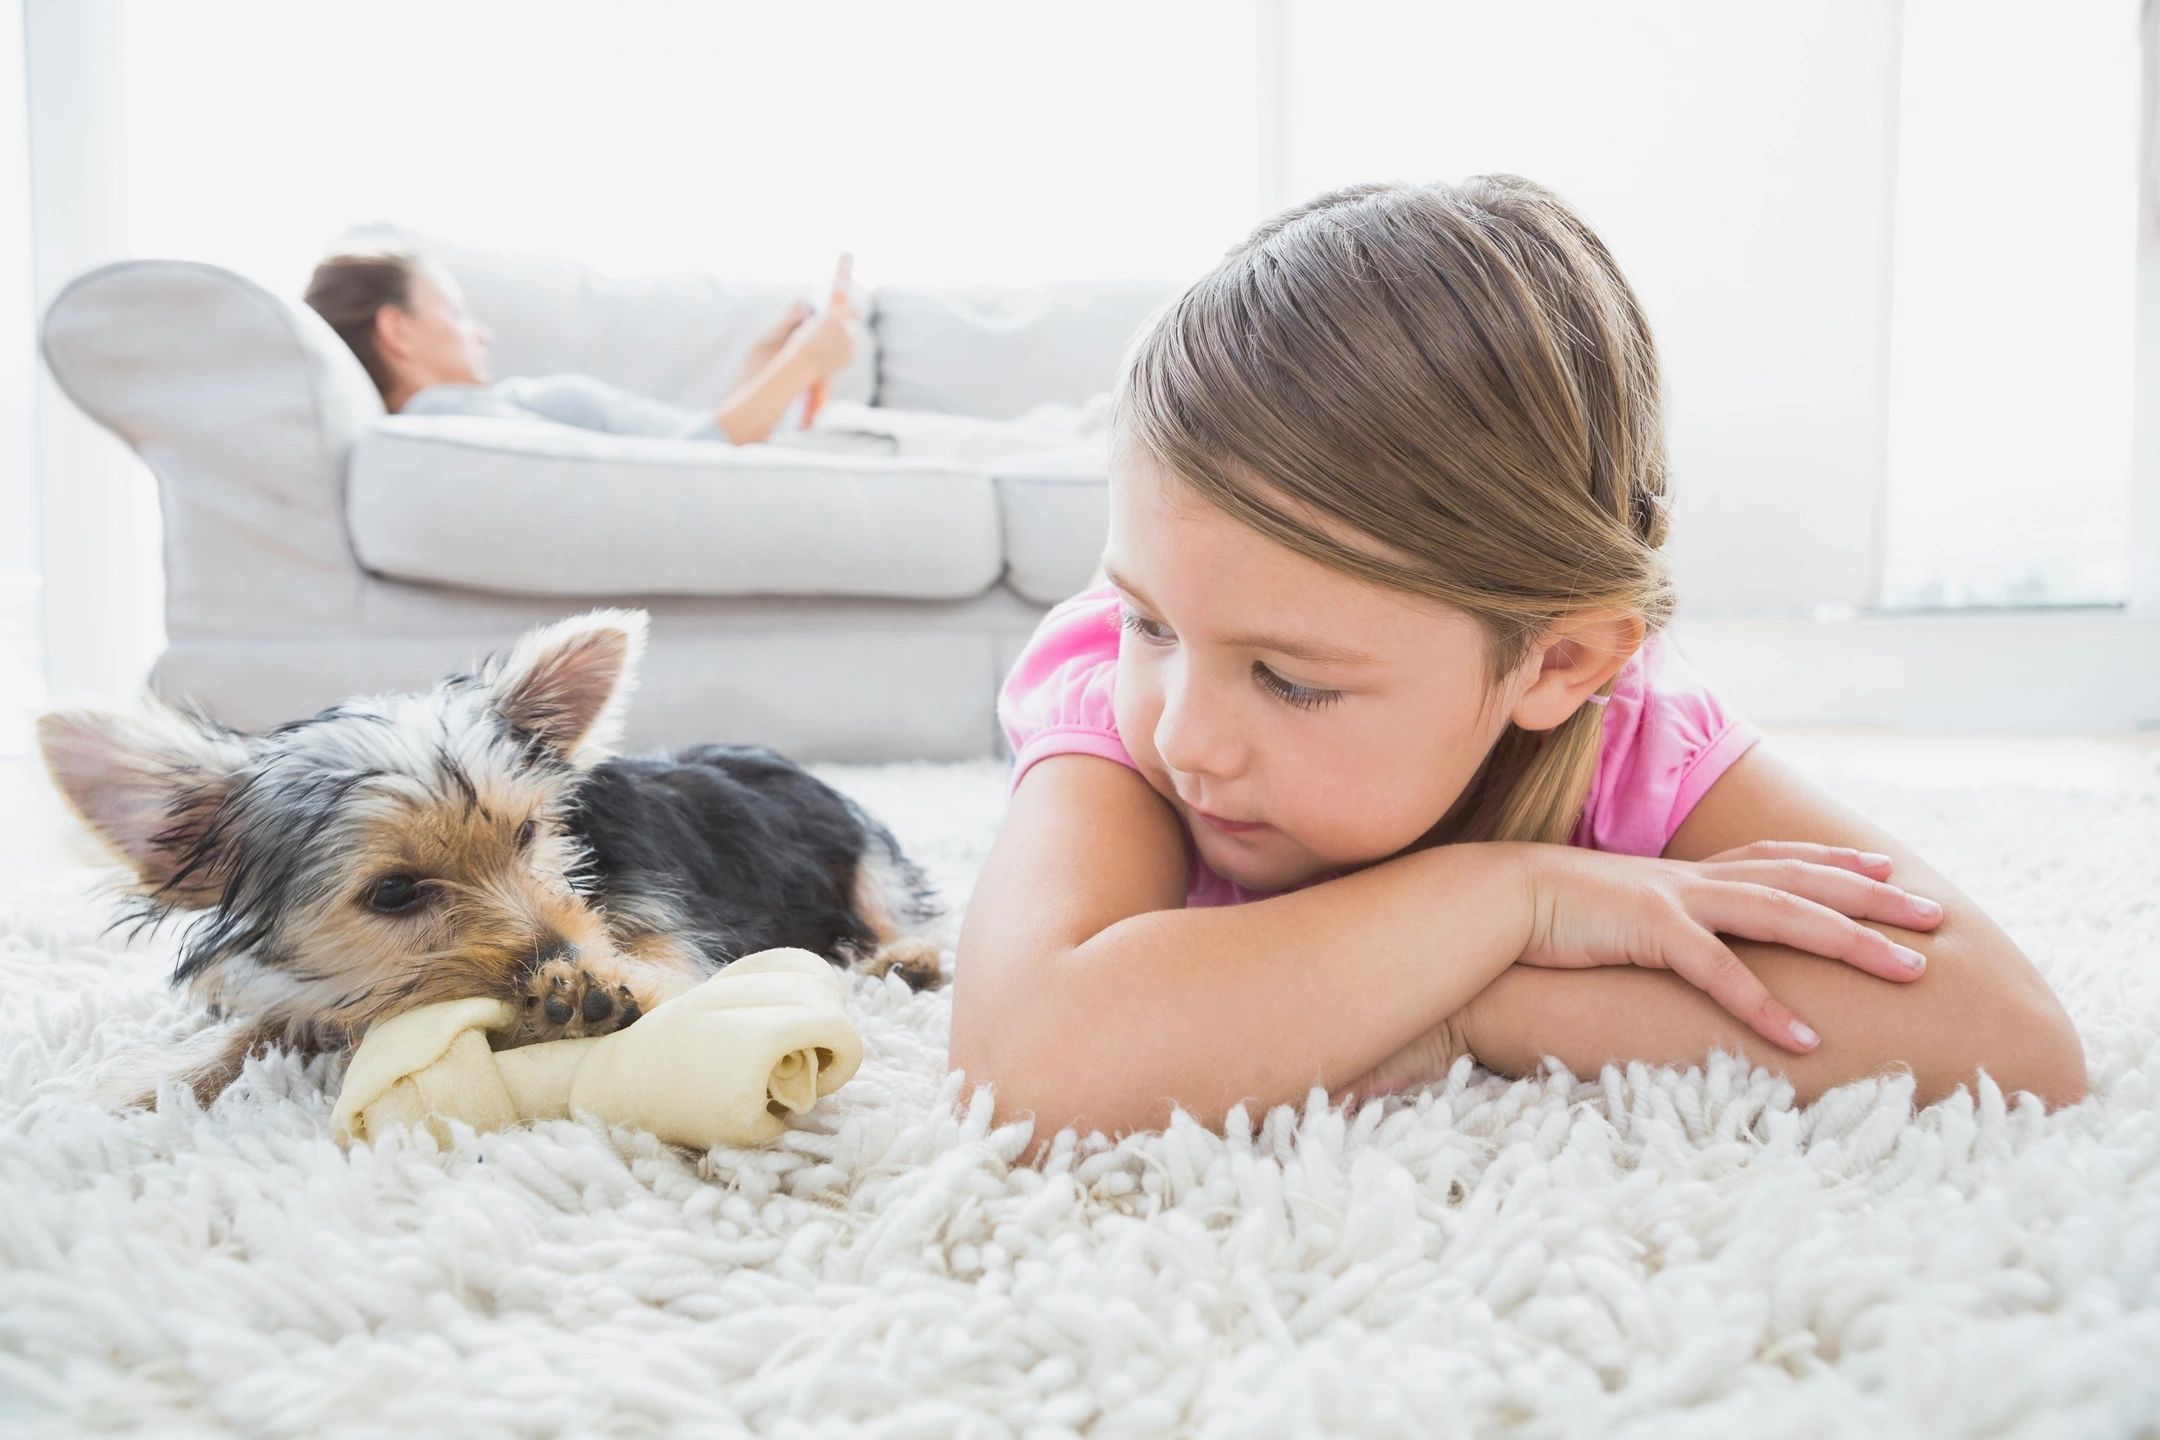 Girl and dog on clean carpet.